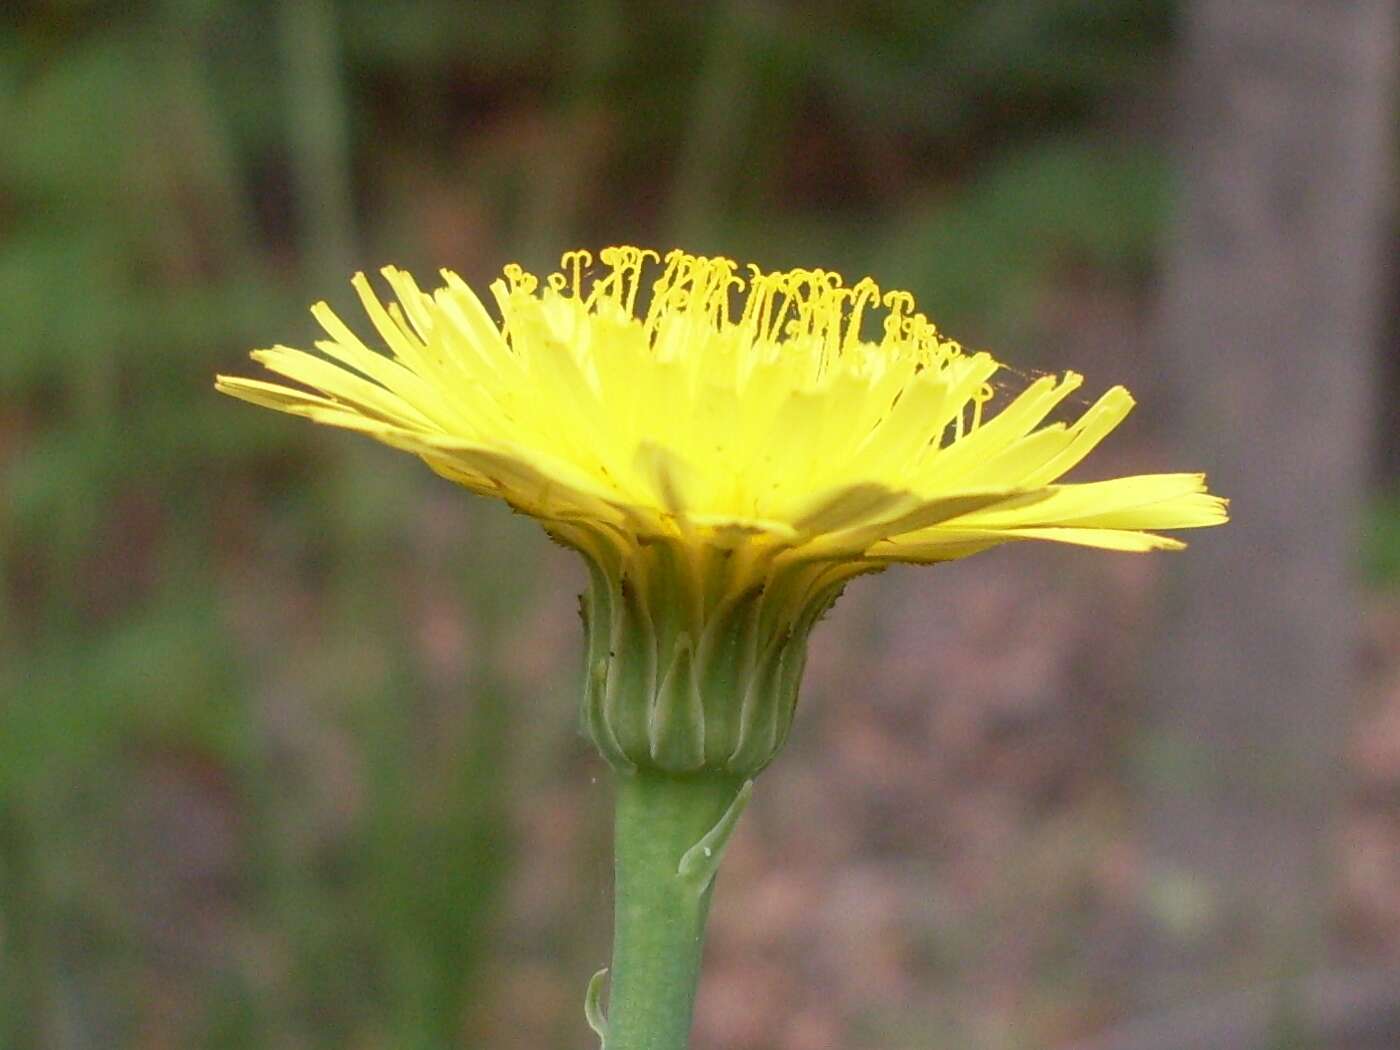 Image of sowthistle